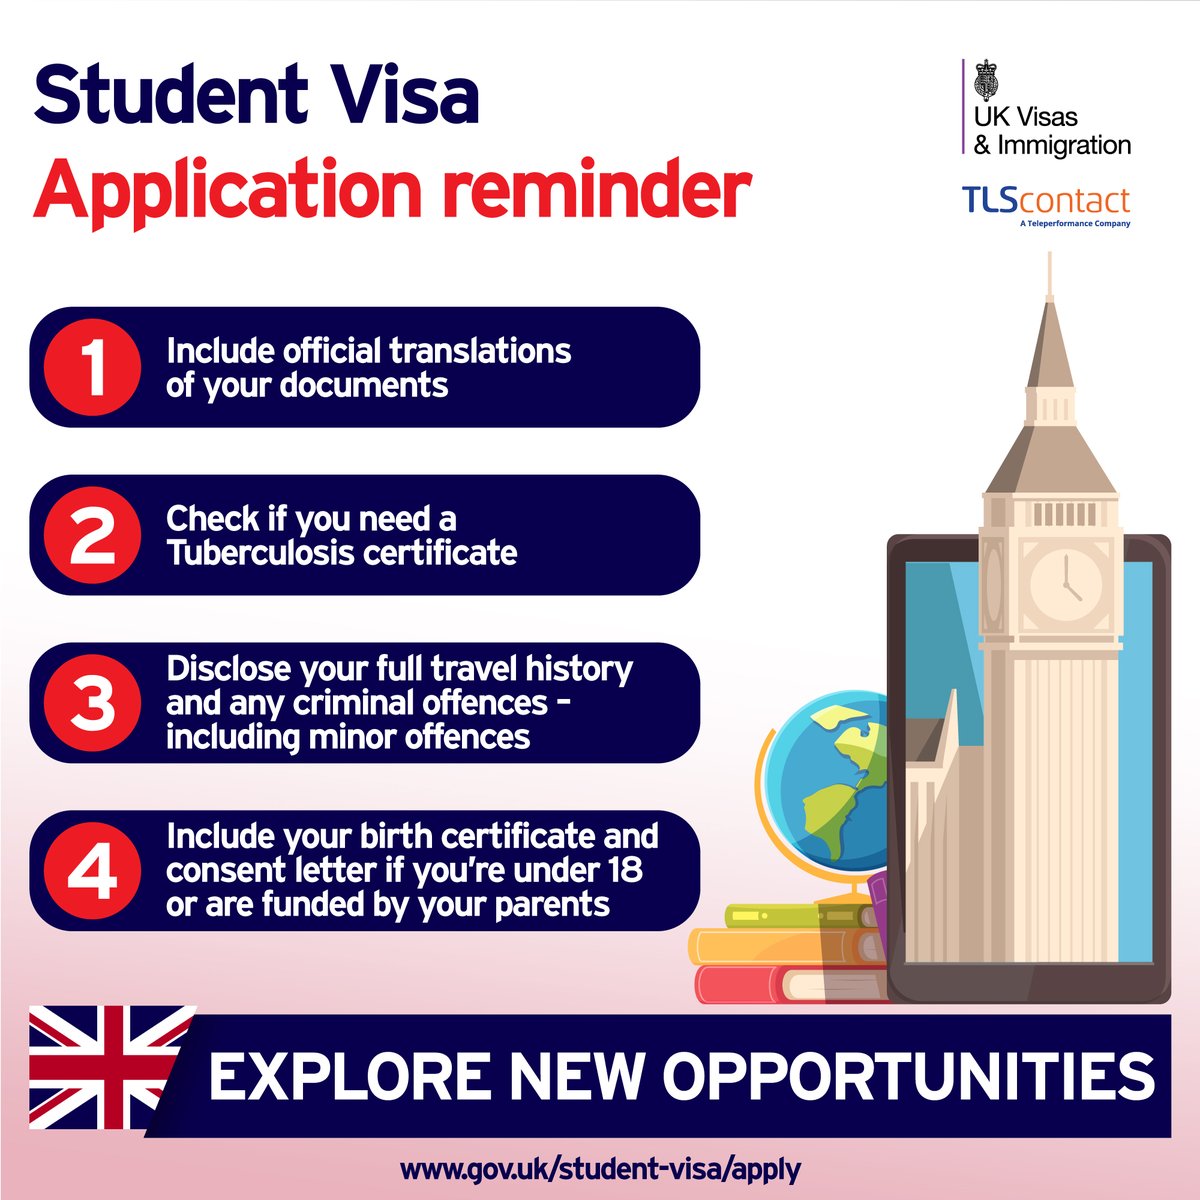 Applying for a UK student visa? Avoid delays by making sure you get your application right first time. 🔗You can find all the information you need on: gov.uk/student visa